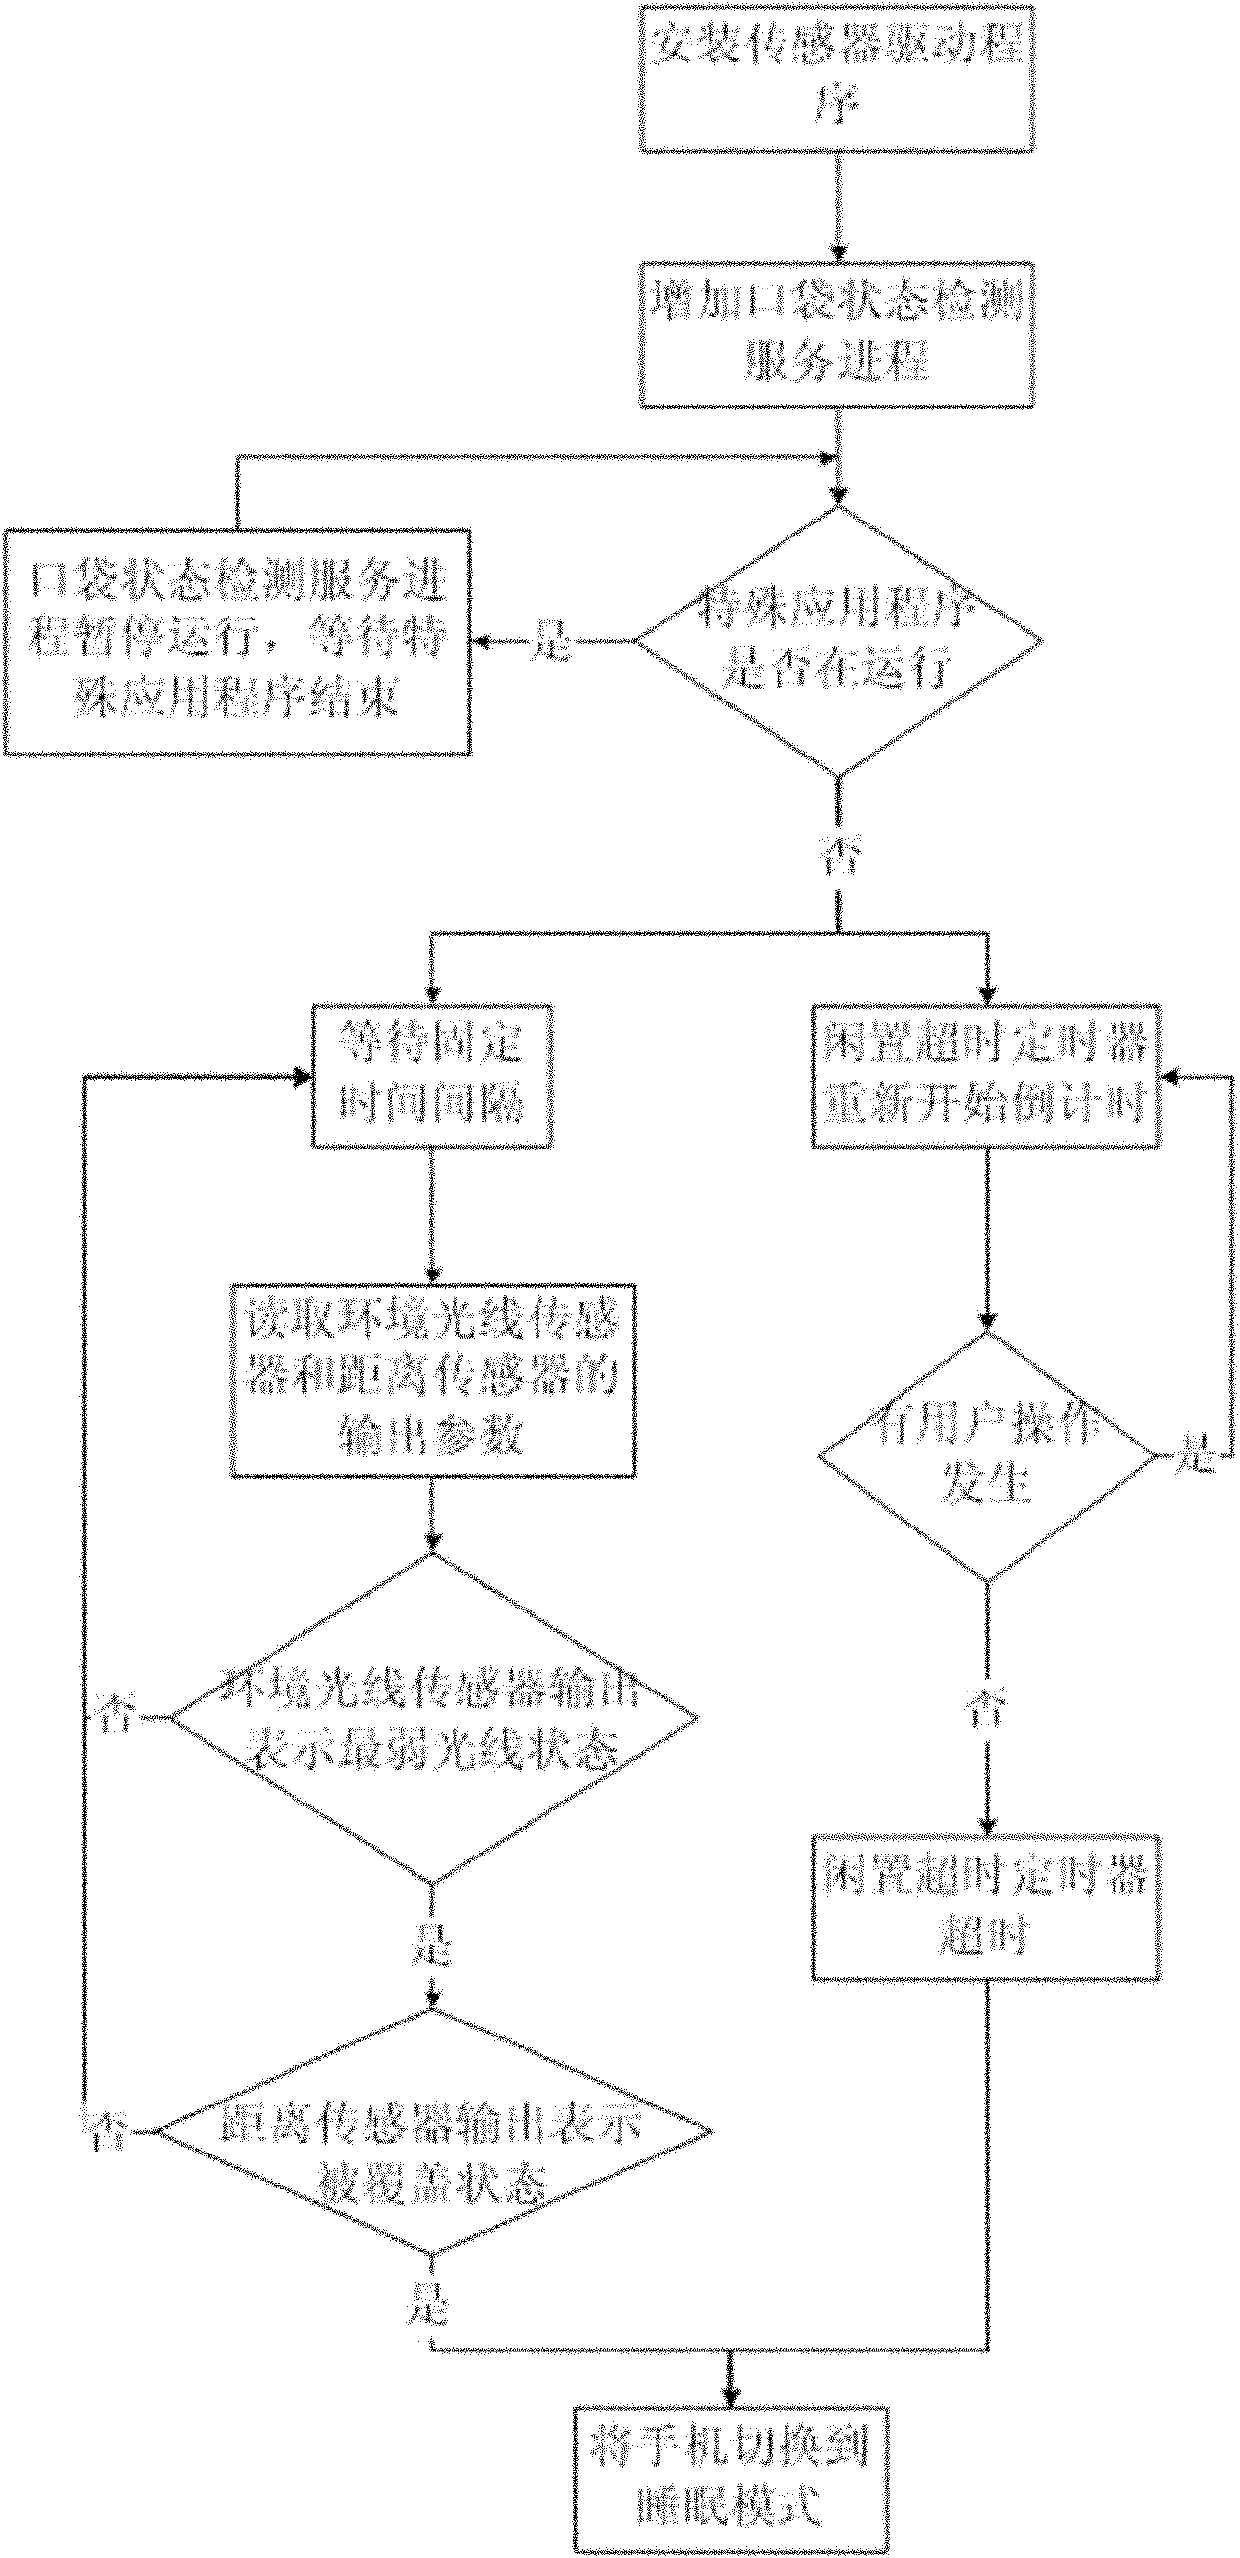 Method for detecting state of cell phone pocket by using Android operating system